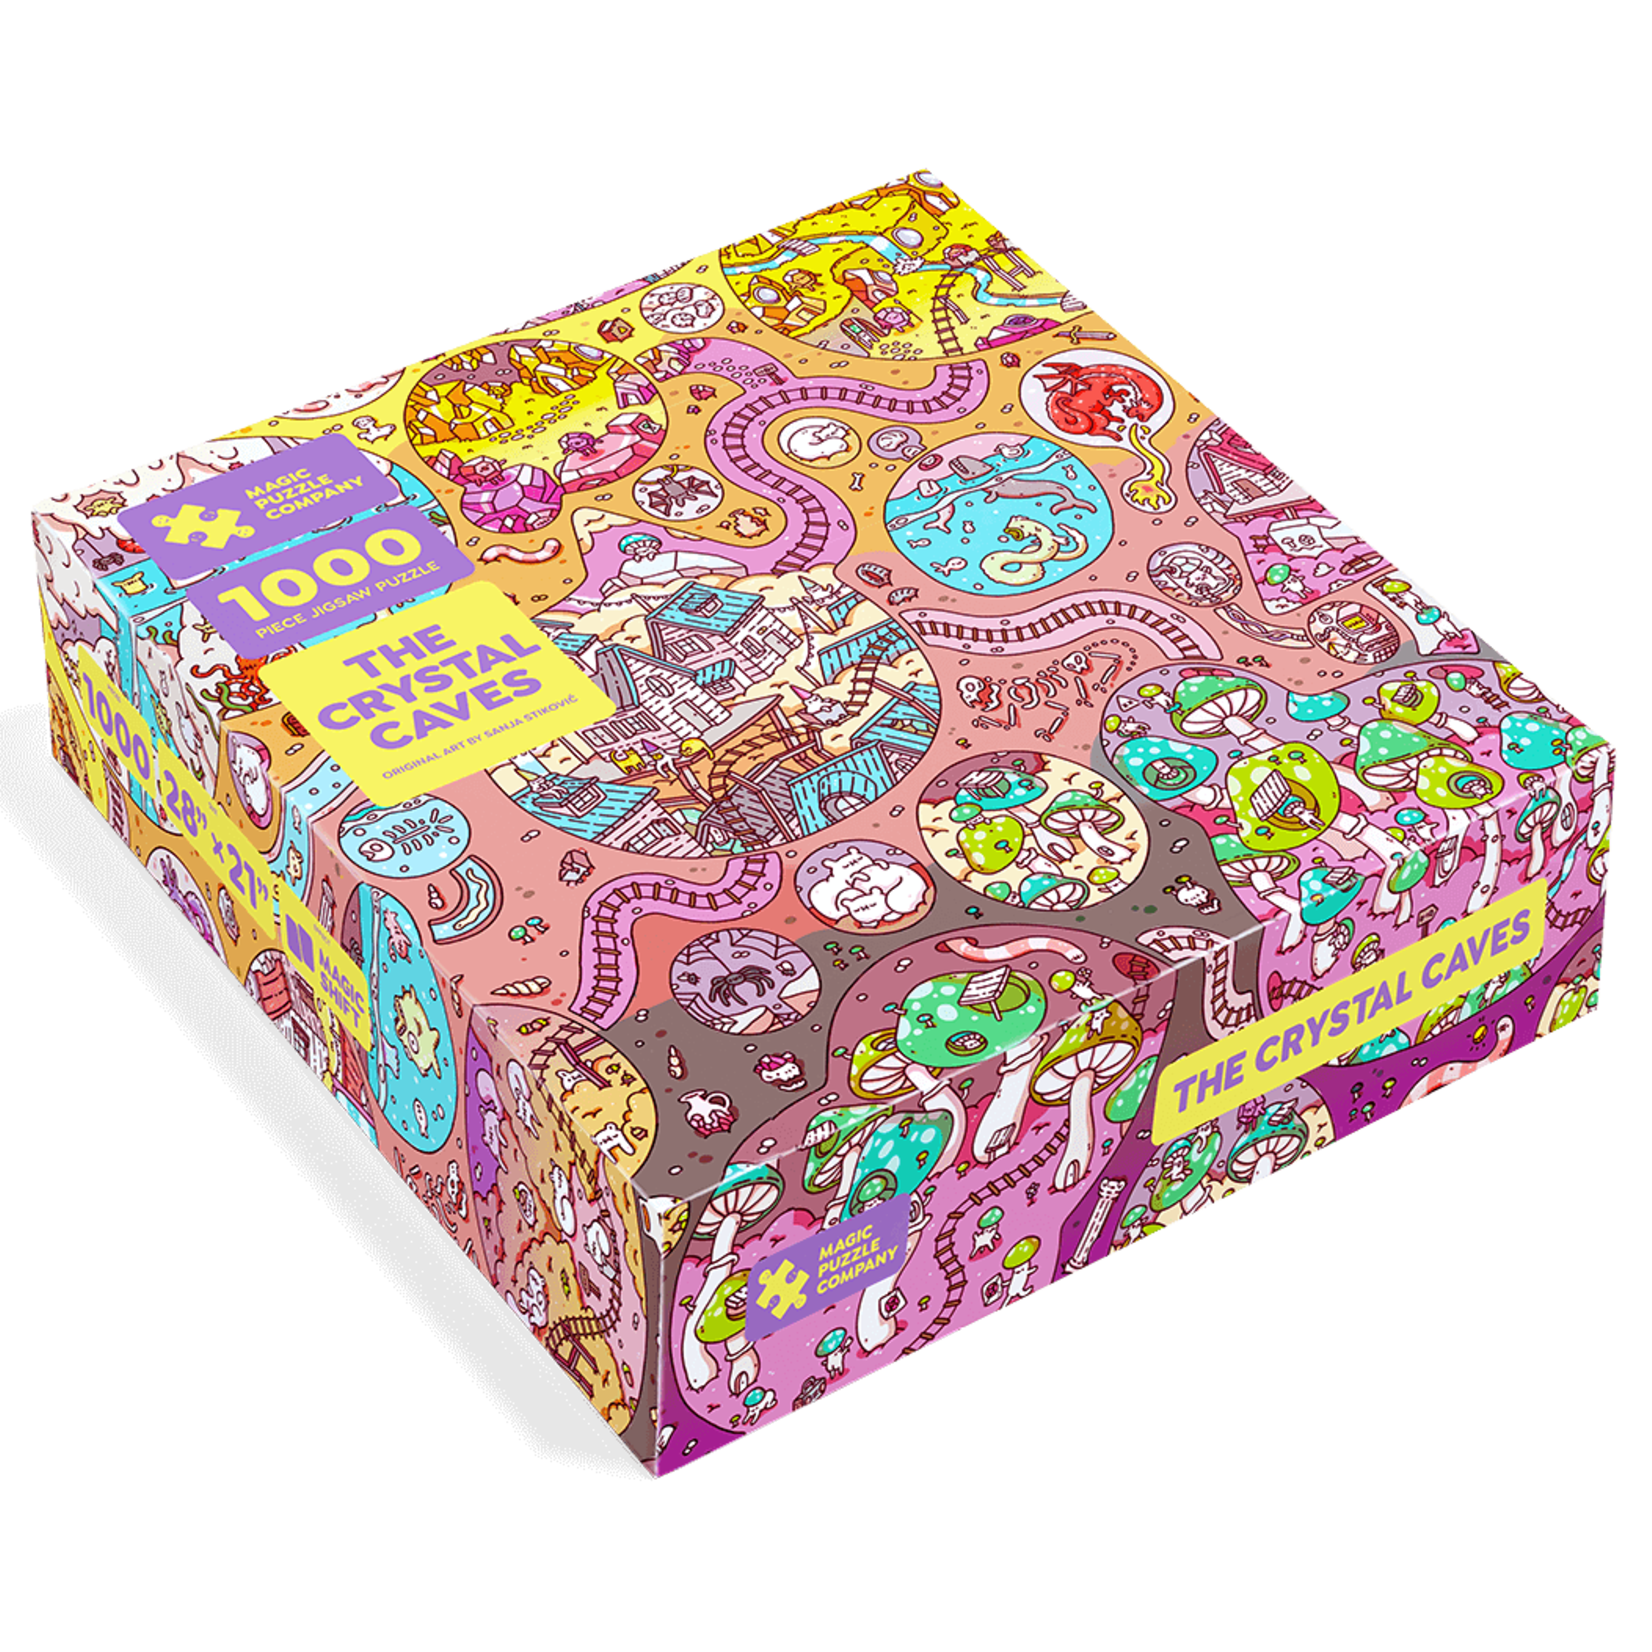 Magic Puzzle Company 1000 pc Puzzle The Crystal Caves